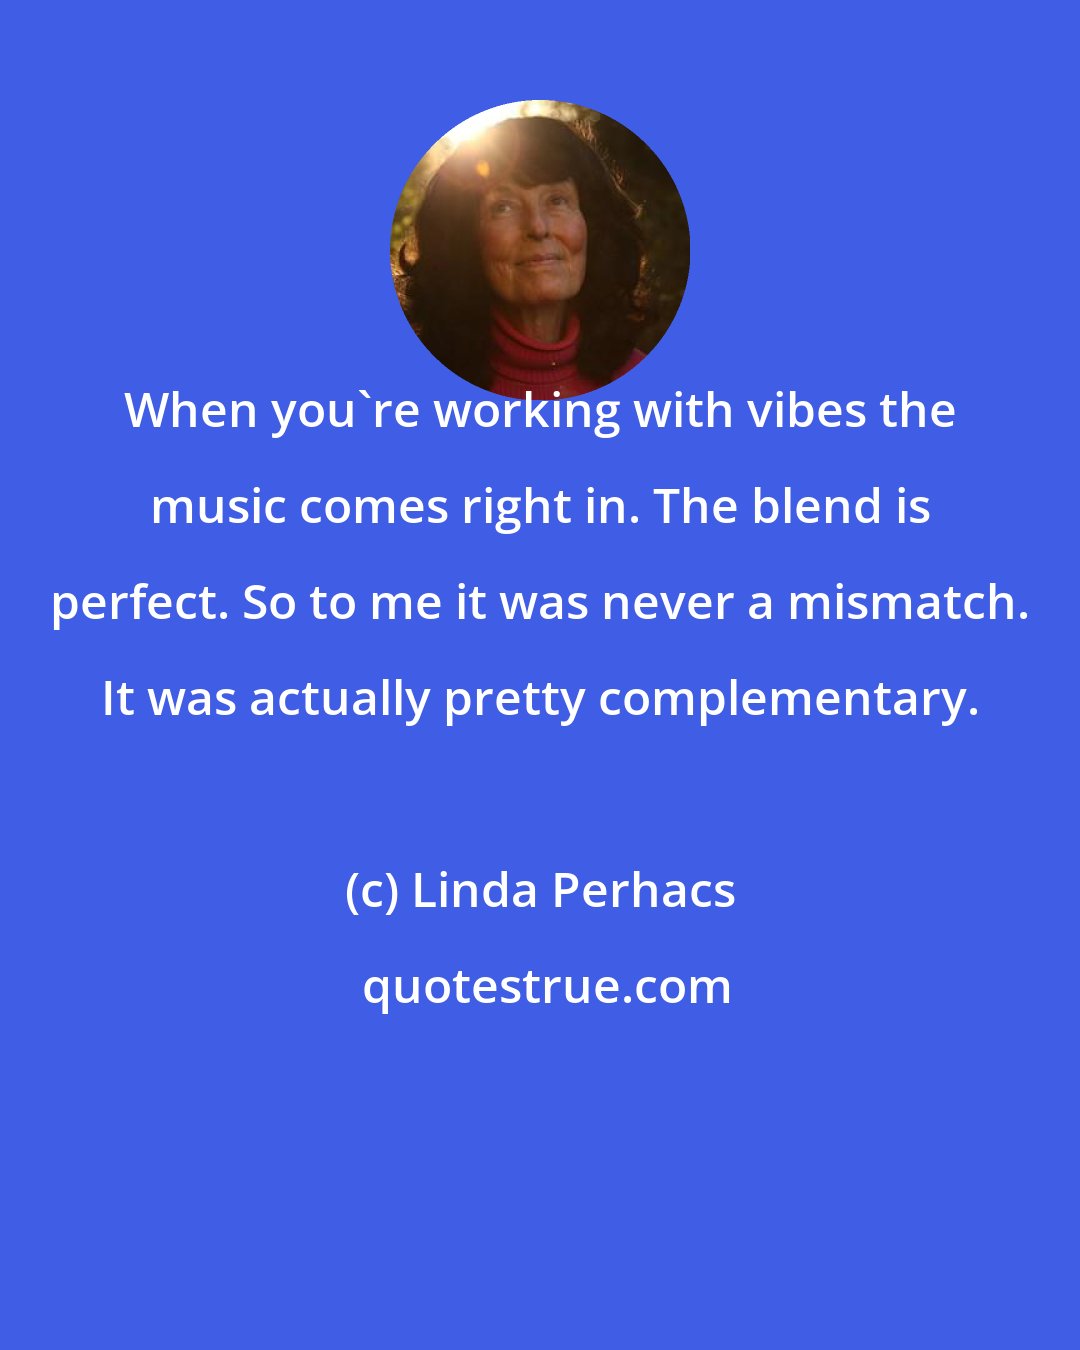 Linda Perhacs: When you're working with vibes the music comes right in. The blend is perfect. So to me it was never a mismatch. It was actually pretty complementary.